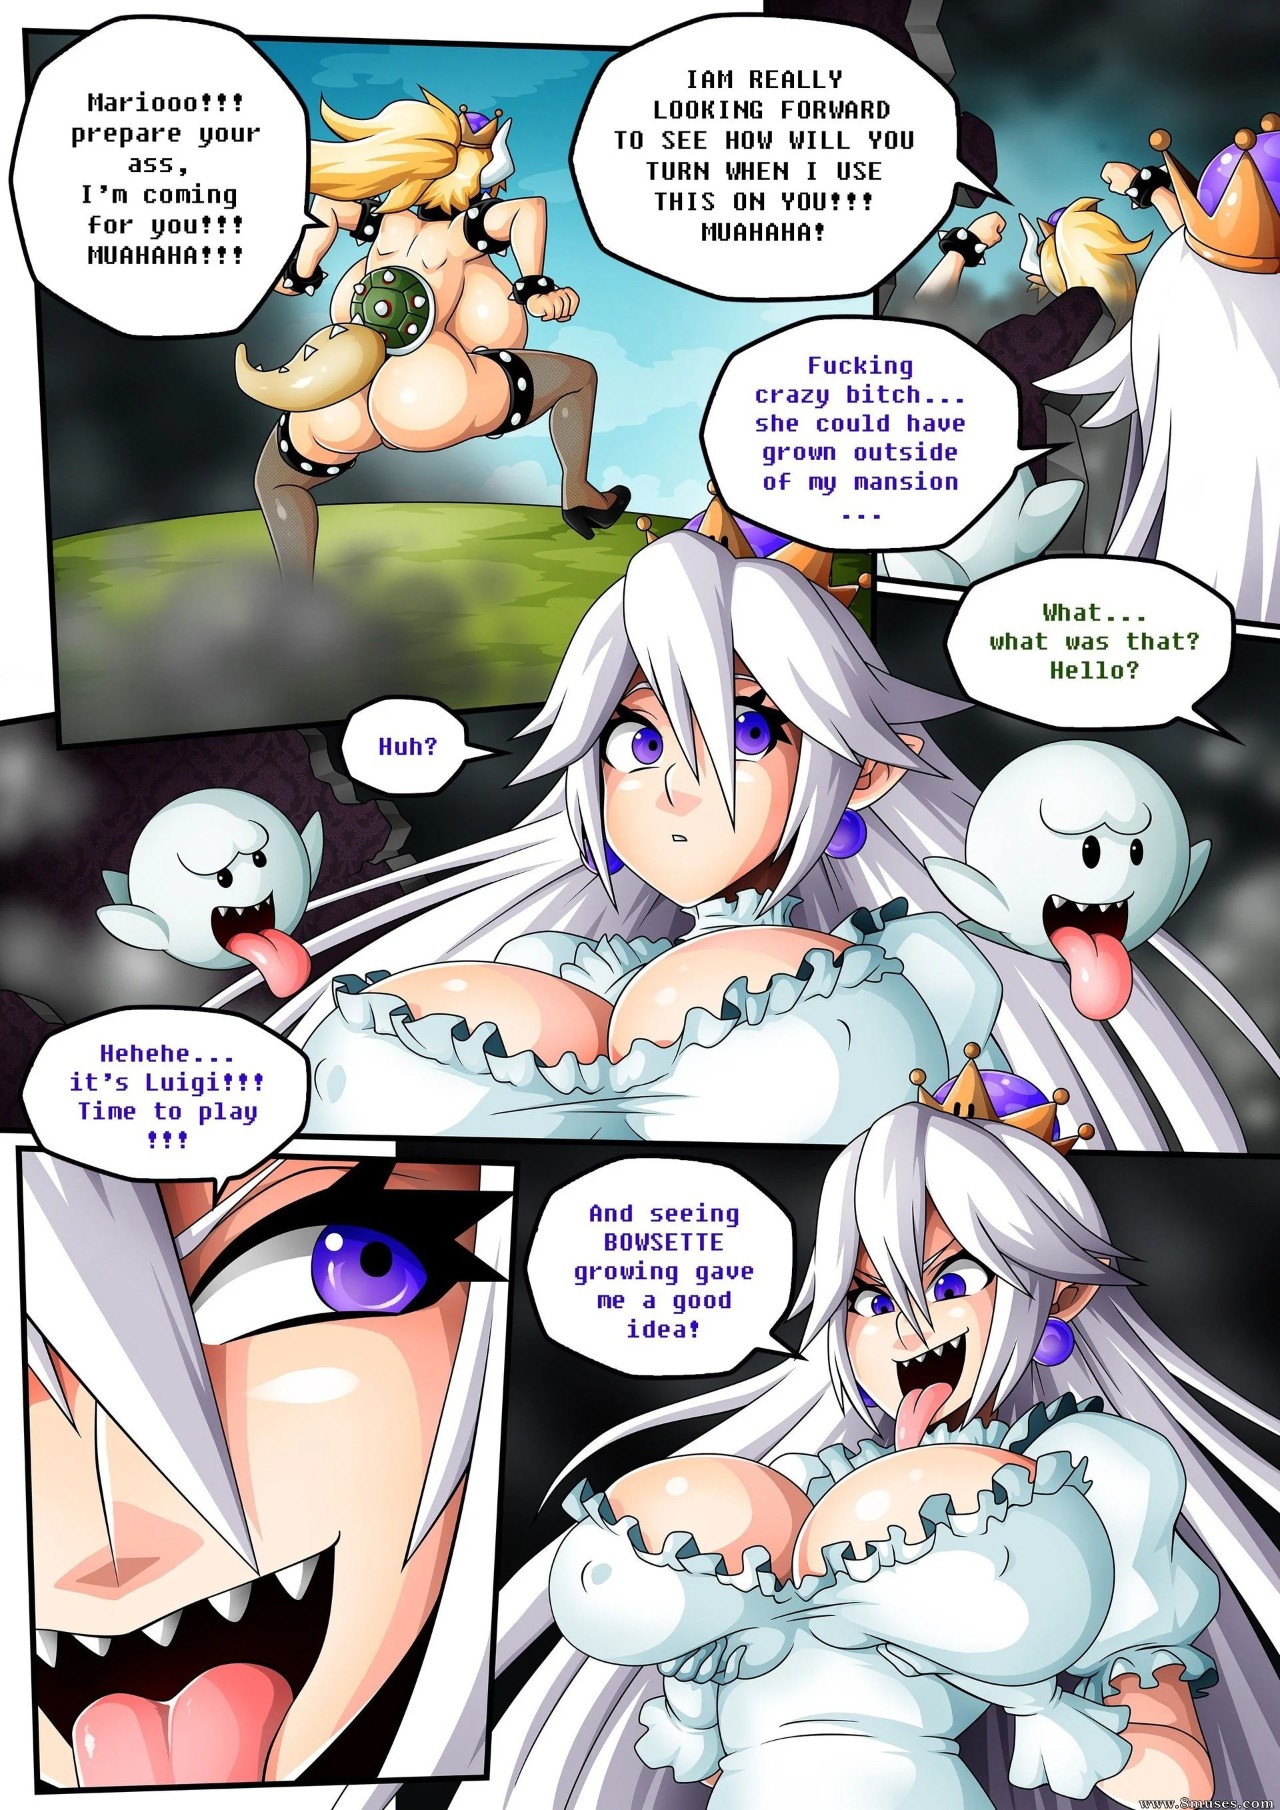 Bowsette By WitchKing00 Part 2 Porn Comic english 07